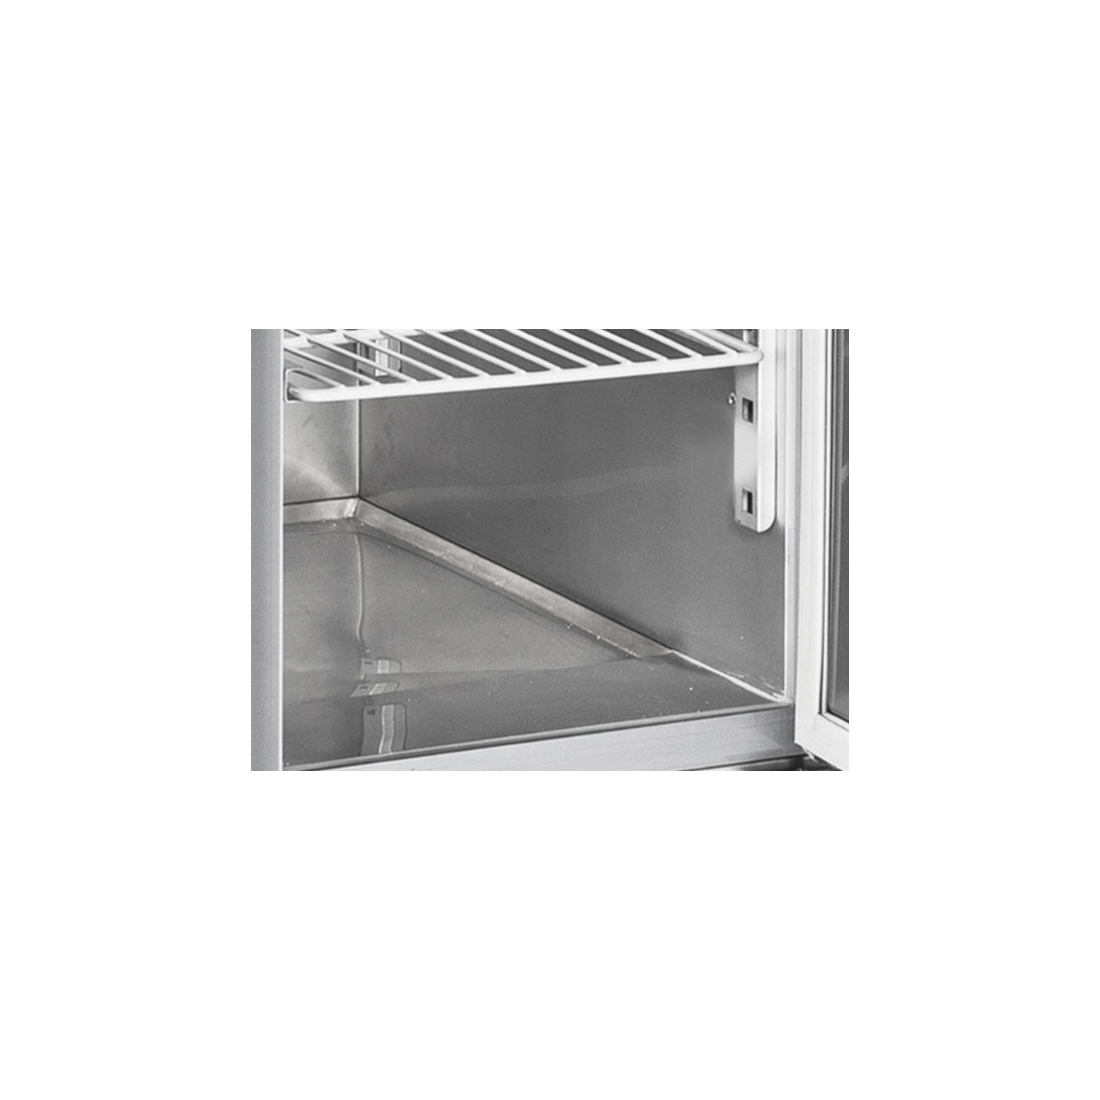 COOL HEAD ,CR45, Stainless Steel, Door, Saladette with Sliding Top|mkayn|مكاين